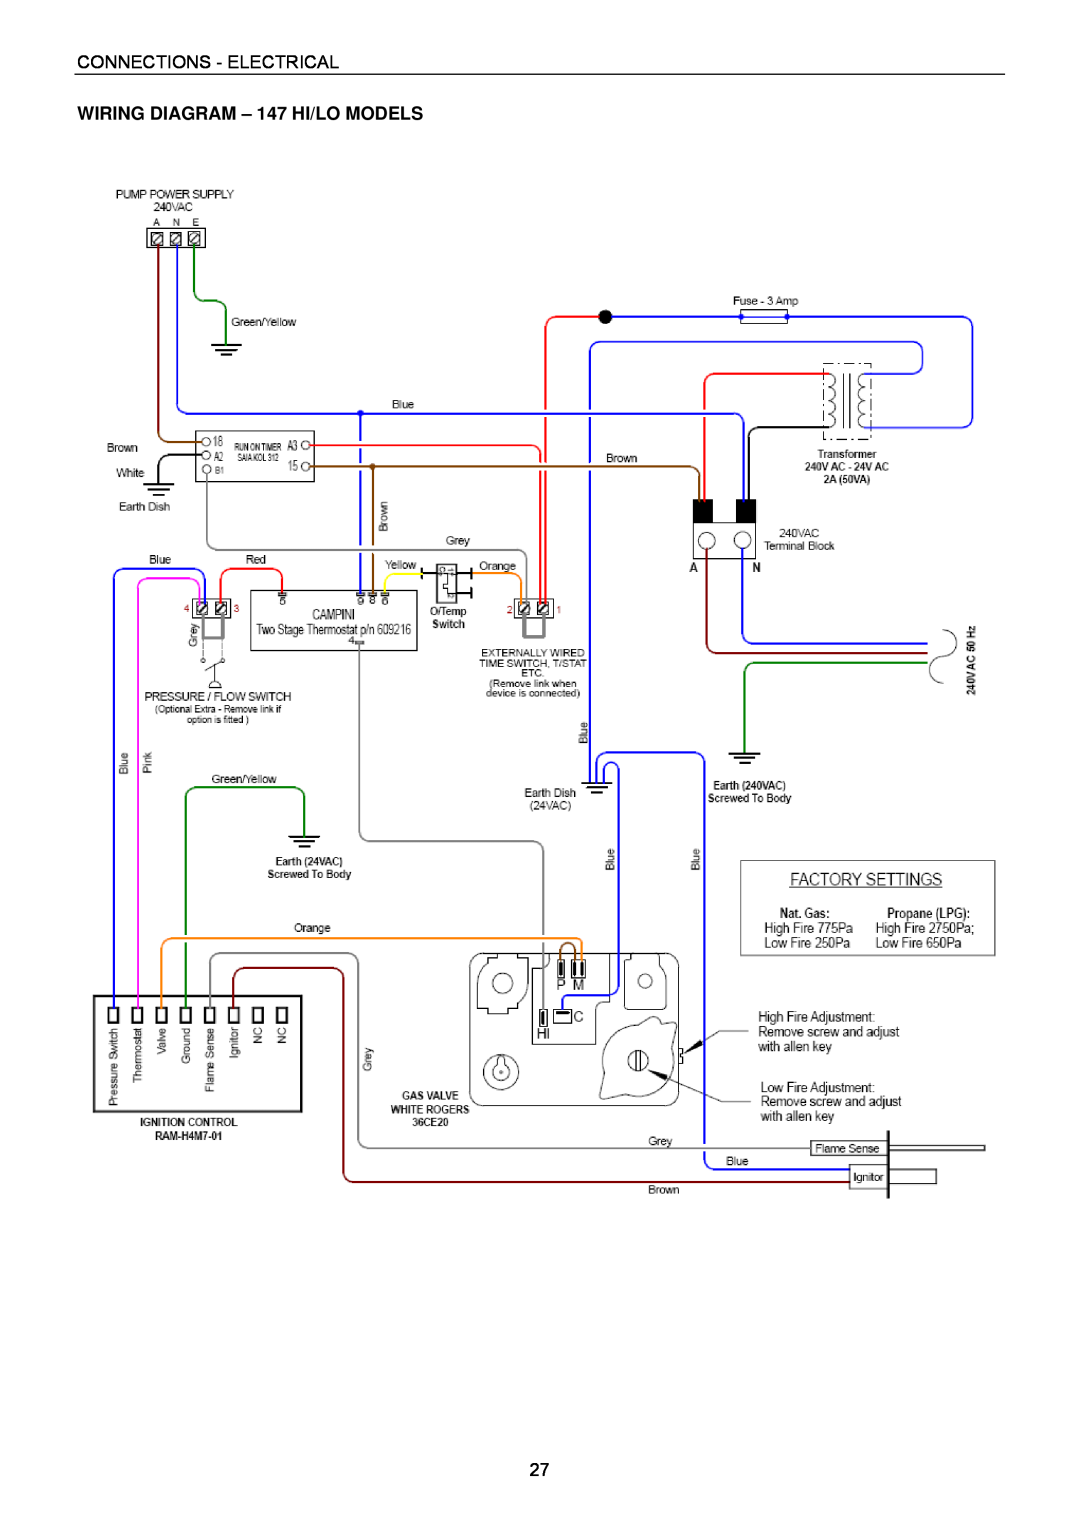 Raypak B0109, B0147 installation instructions WIRING DIAGRAM - 147 HI/LO MODELS, Connections - Electrical 